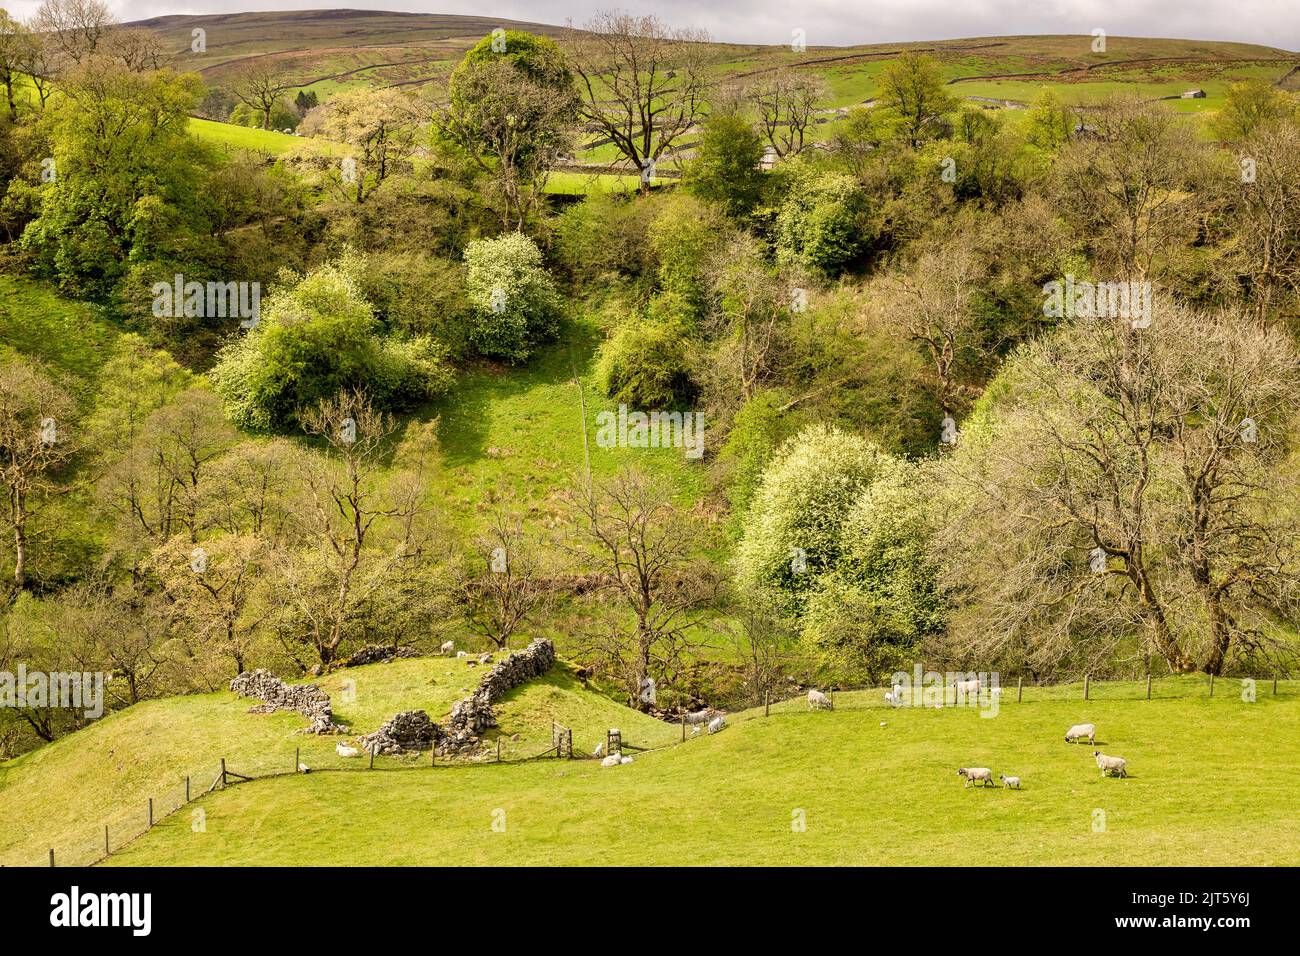 Sheep grazing in a wooded area of Swaledale, Yorkshire Dales National Park, North Yorkshire, UK Stock Photo